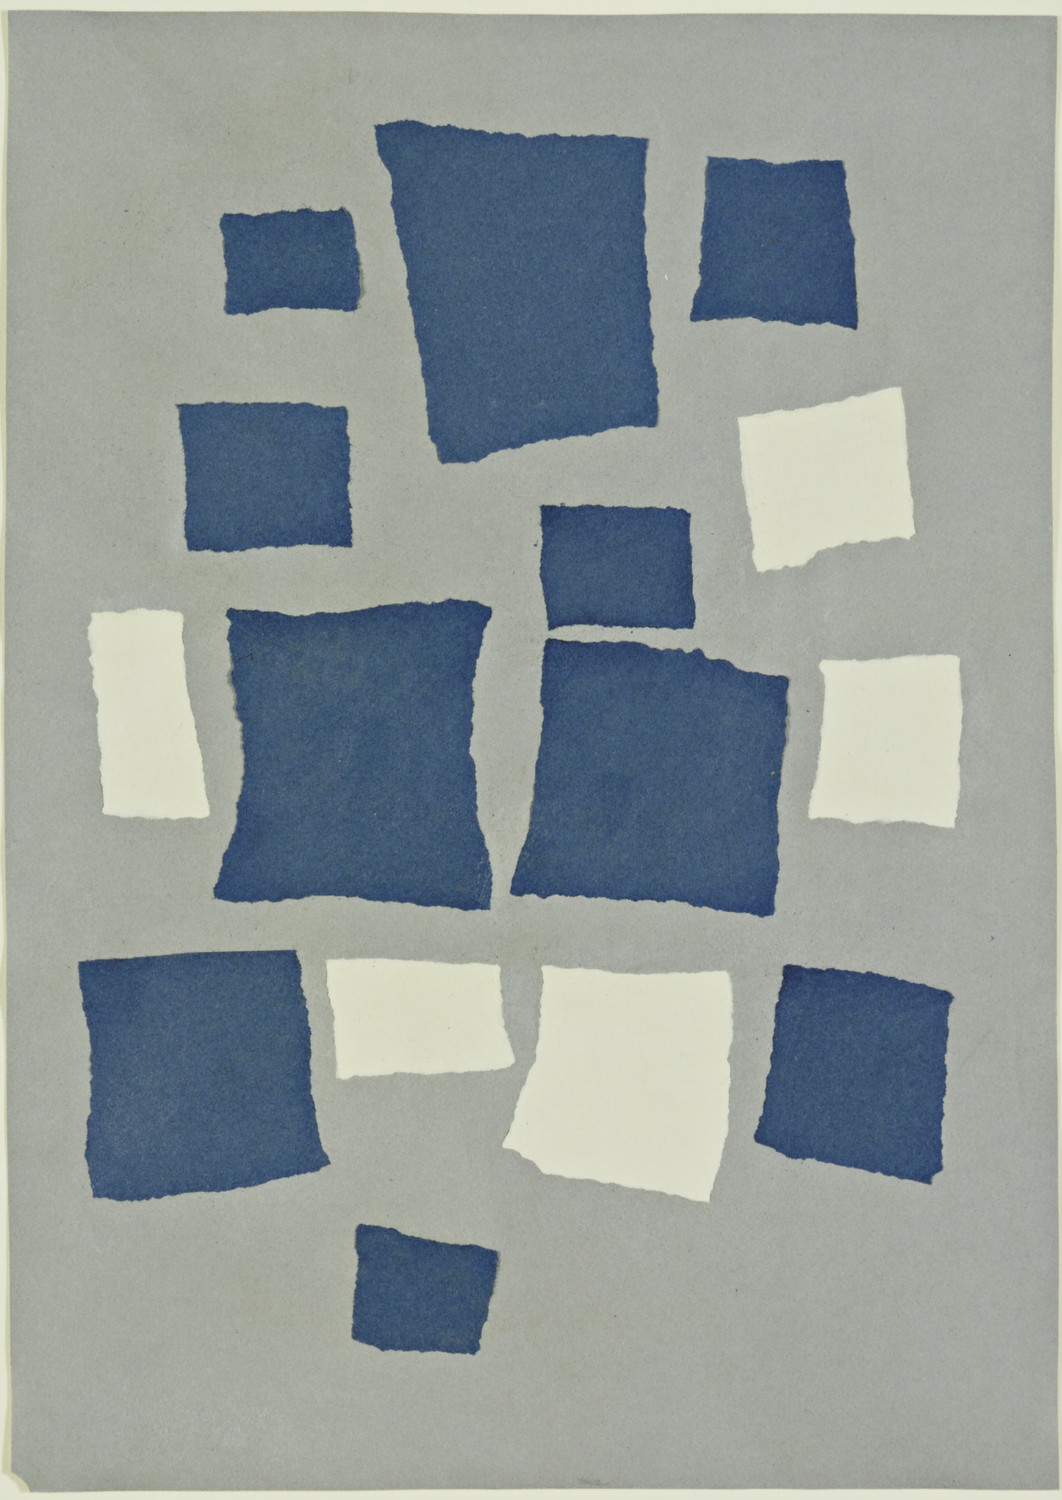 Jean Hans Arp - Squares Arranged by Chance - 1916-1917